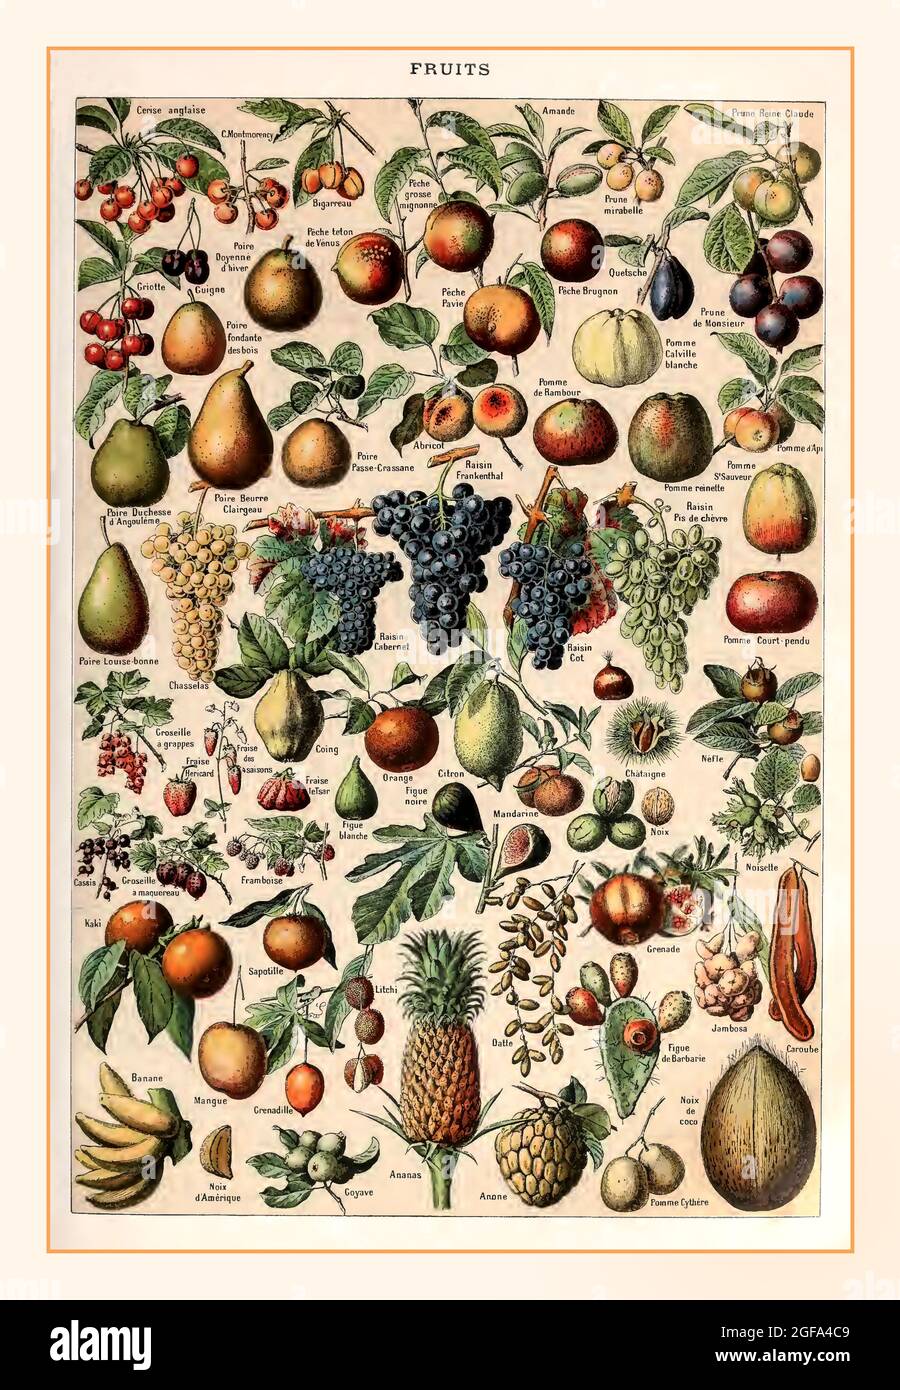 FRUIT ILLUSTRATION Vintage Larousse Fruits Lithograph illustration 1898 wide variety of fruits and vegetables by Adolphe Millot  Nouveau Larousse Illustree. Stock Photo